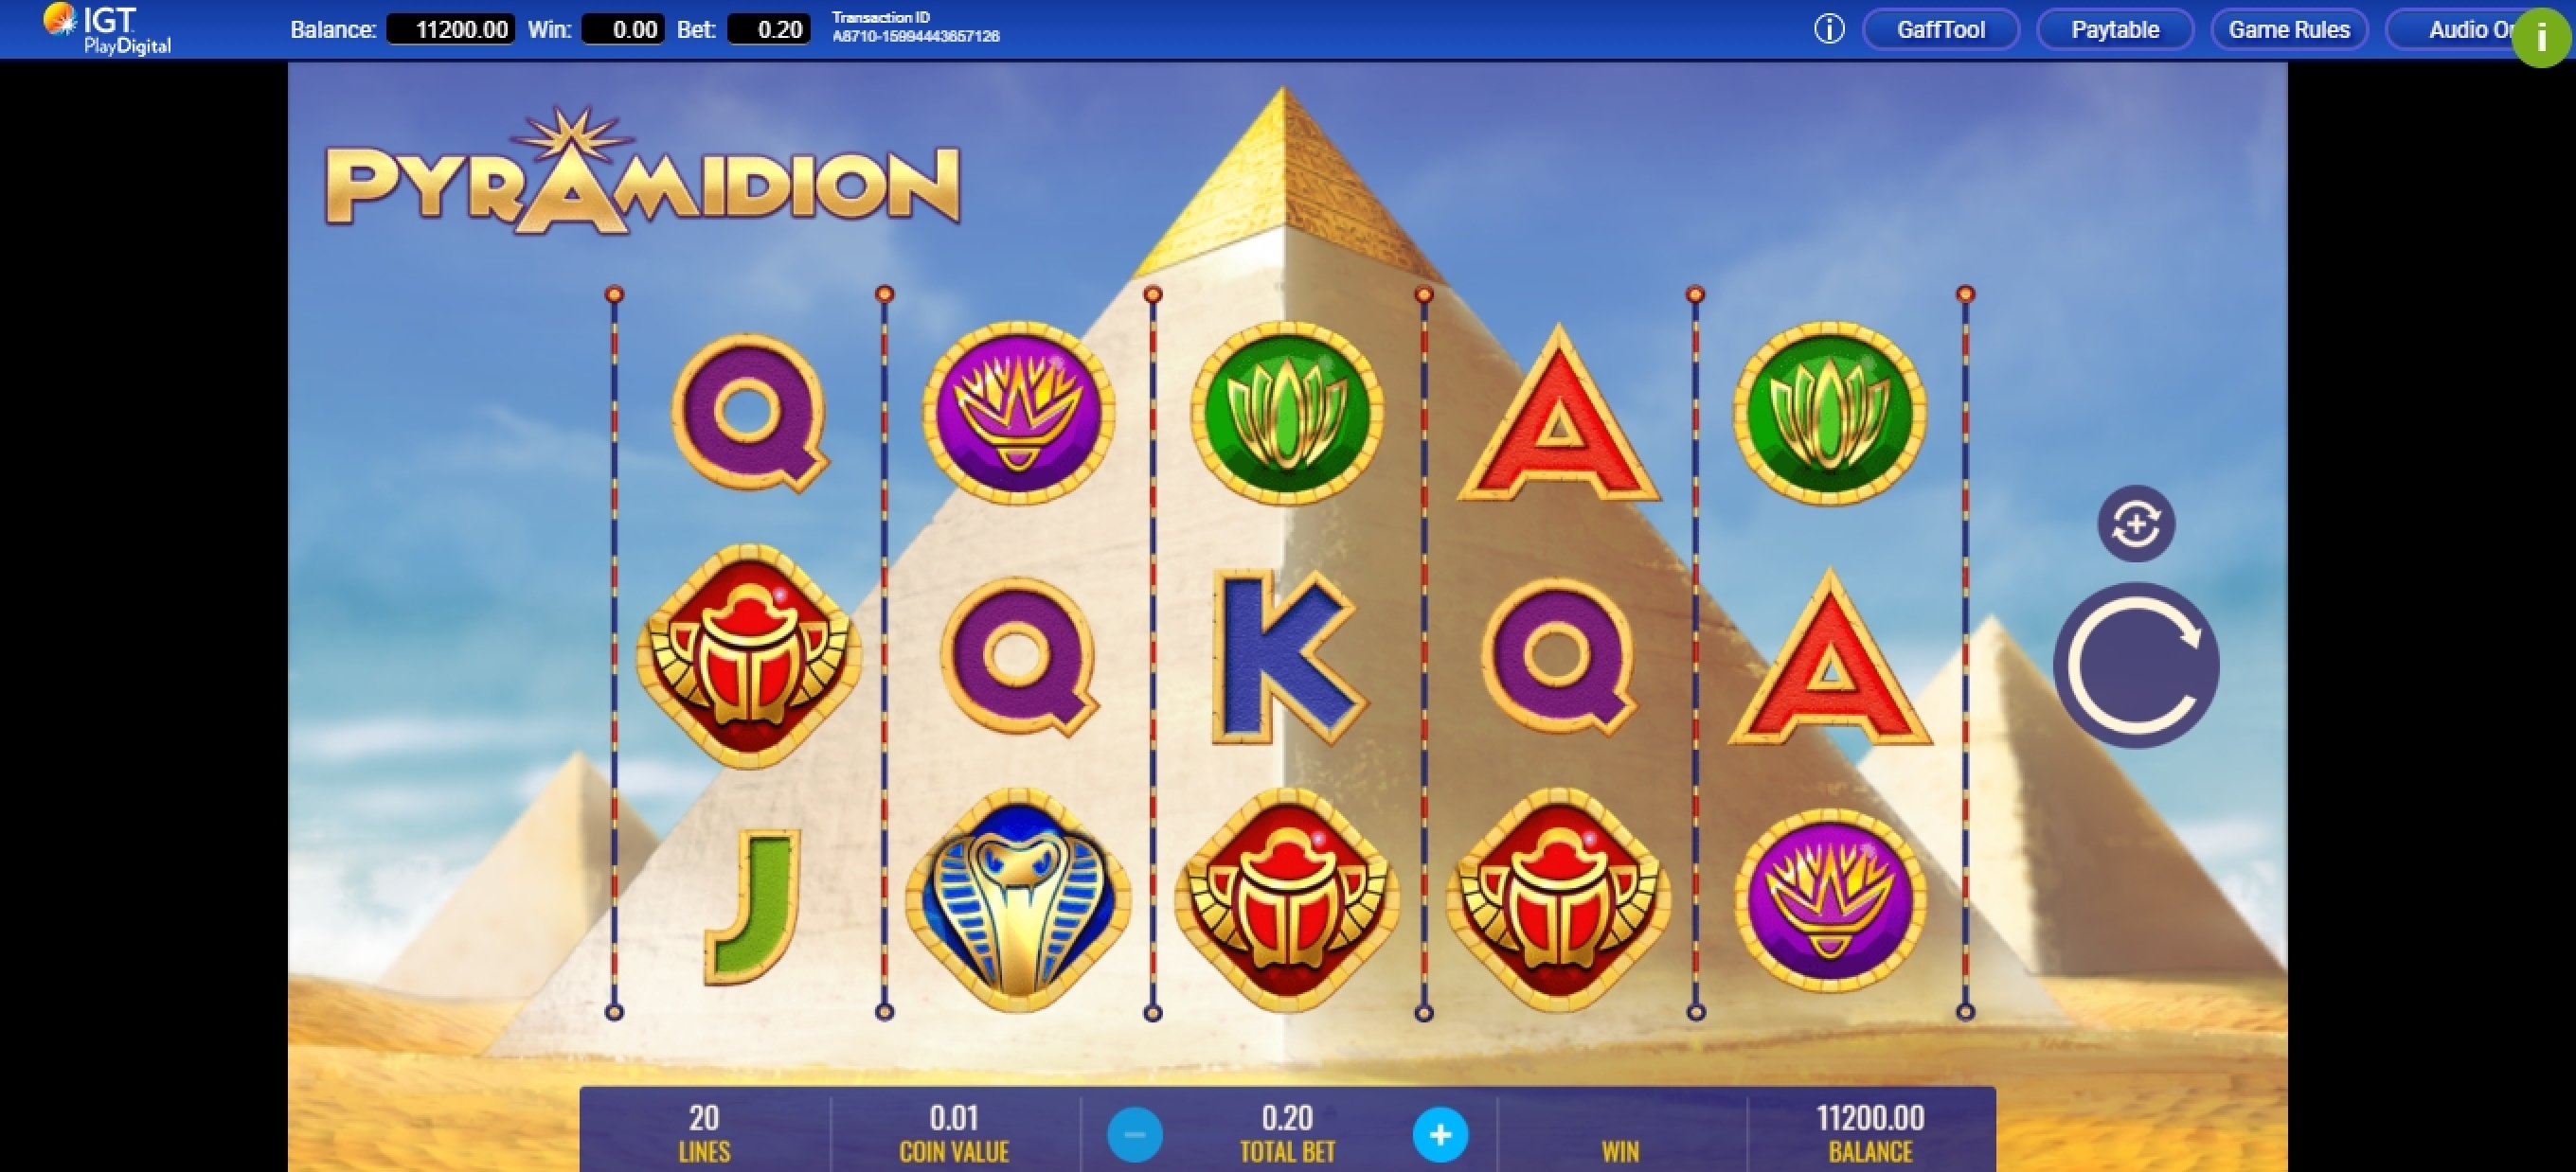 Reels in Pyramidion Slot Game by IGT